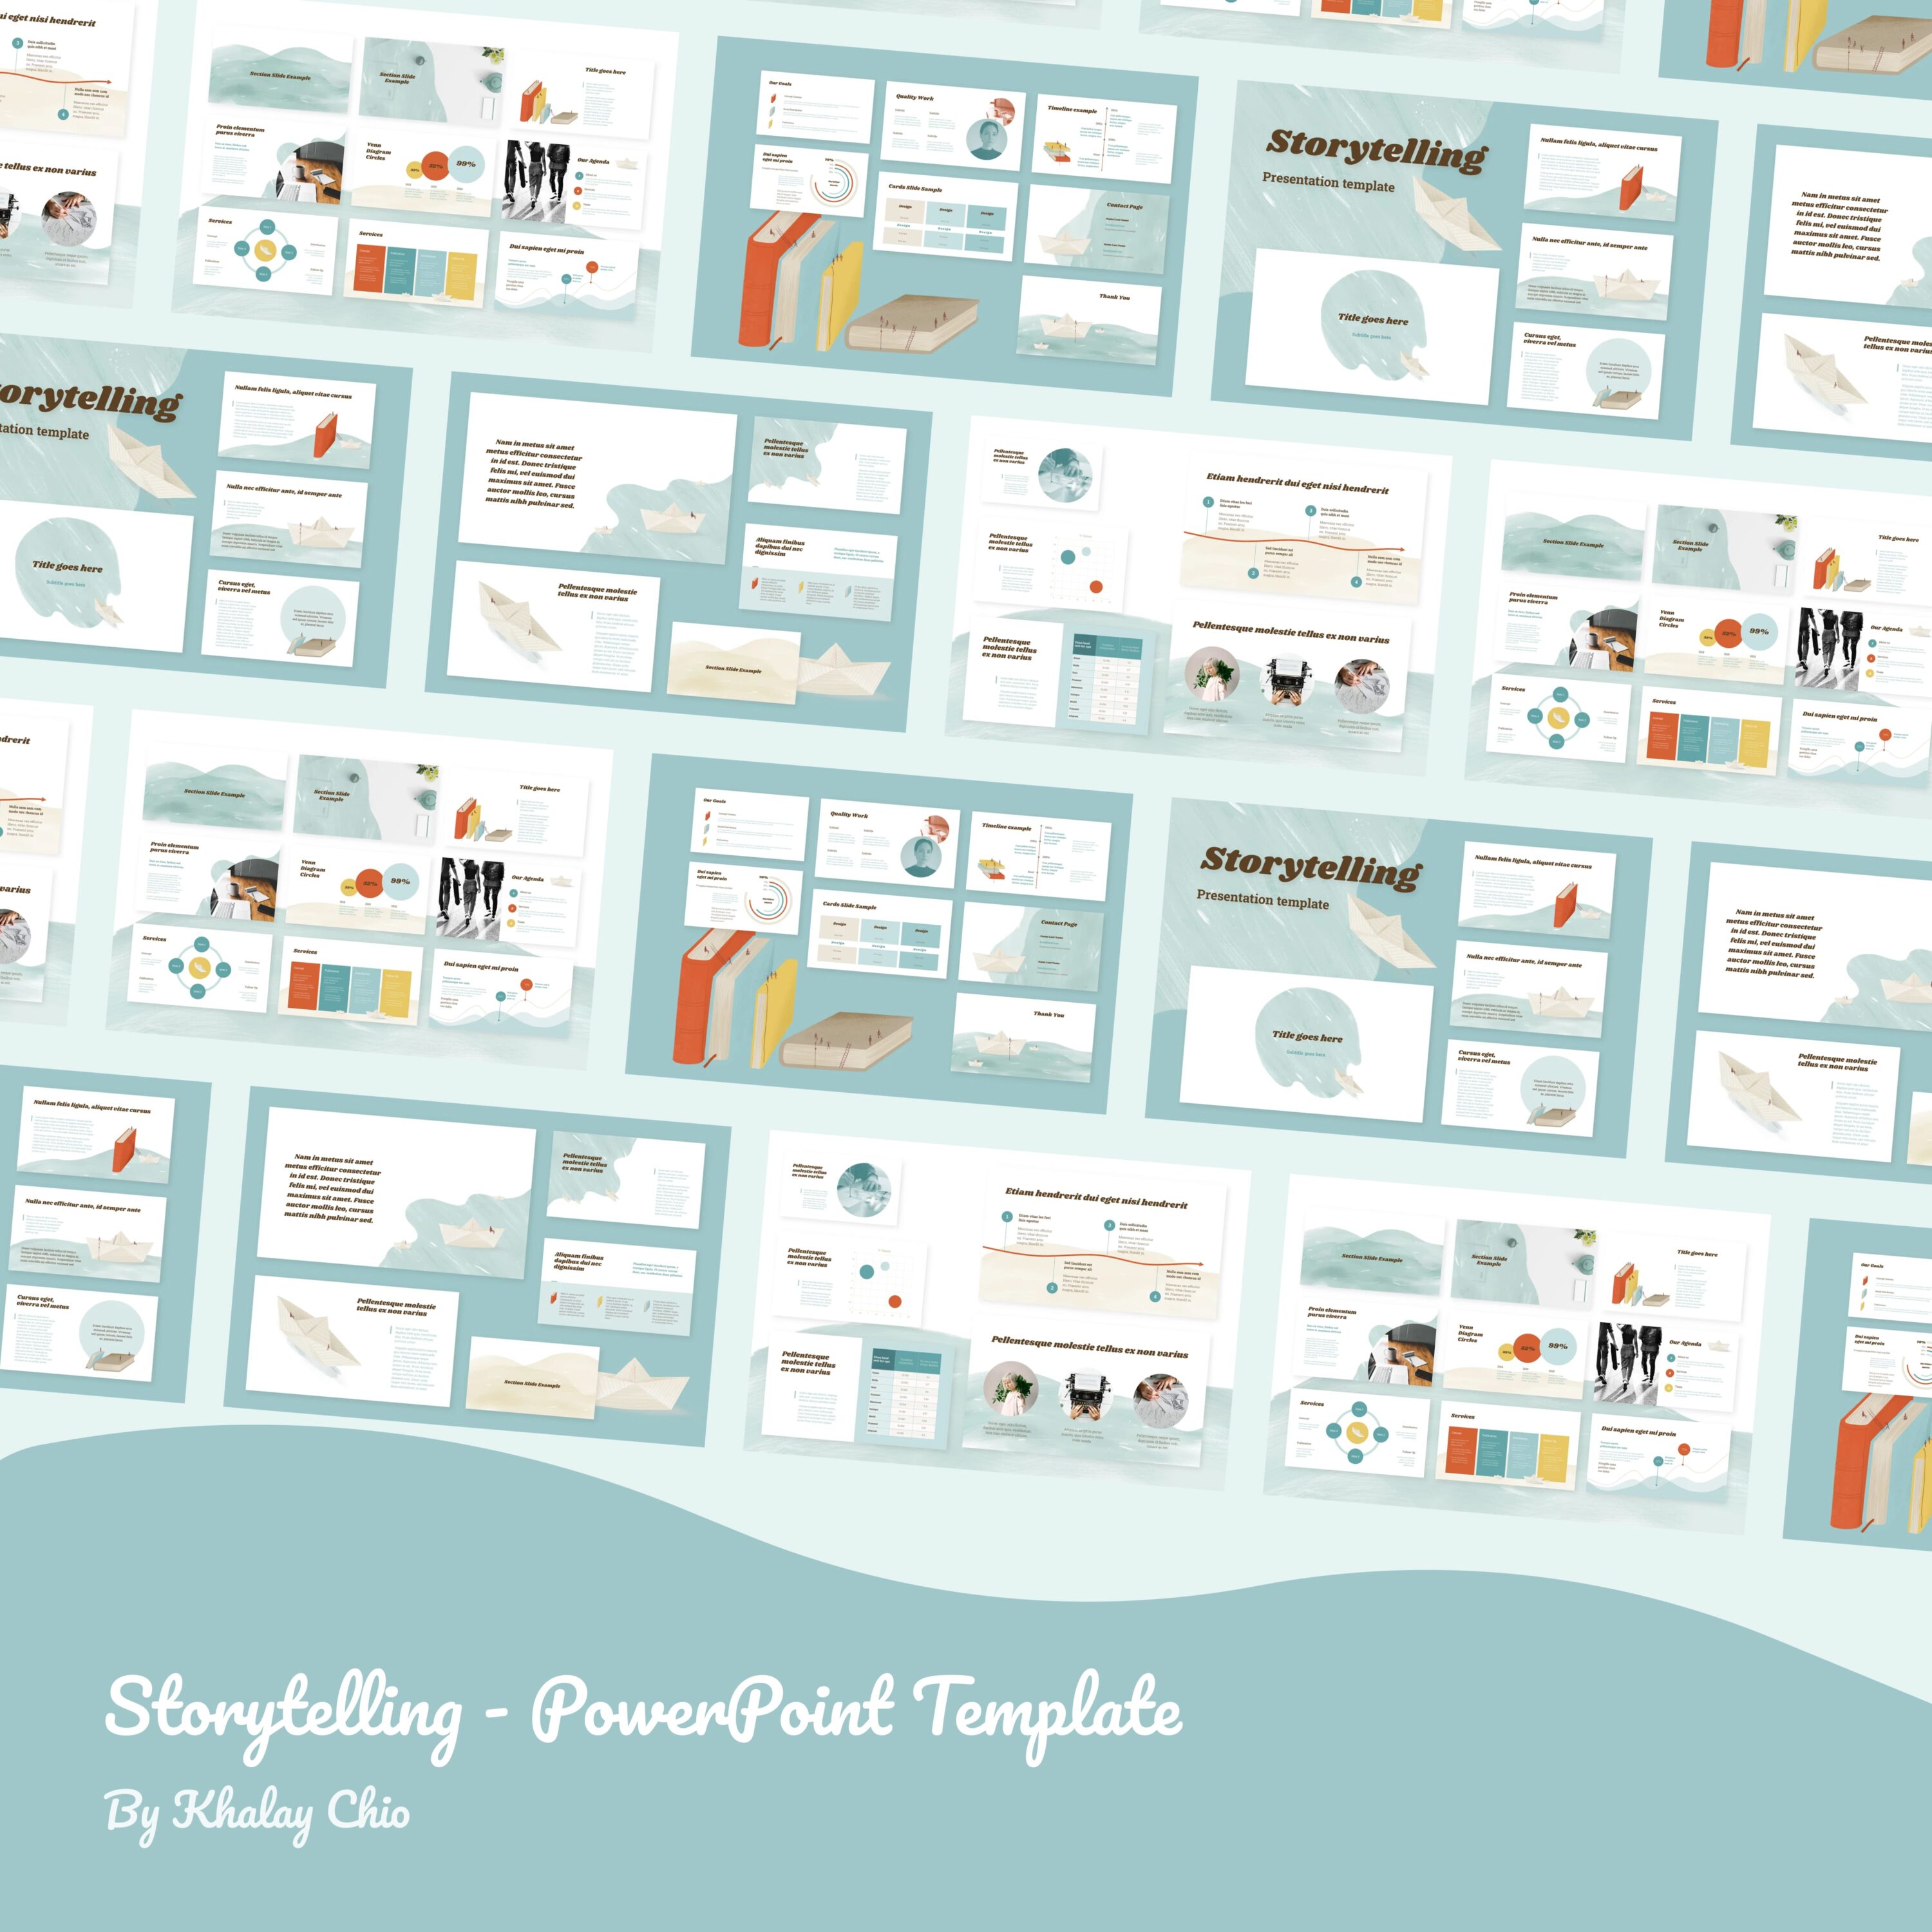 Storytelling - PowerPoint Template.